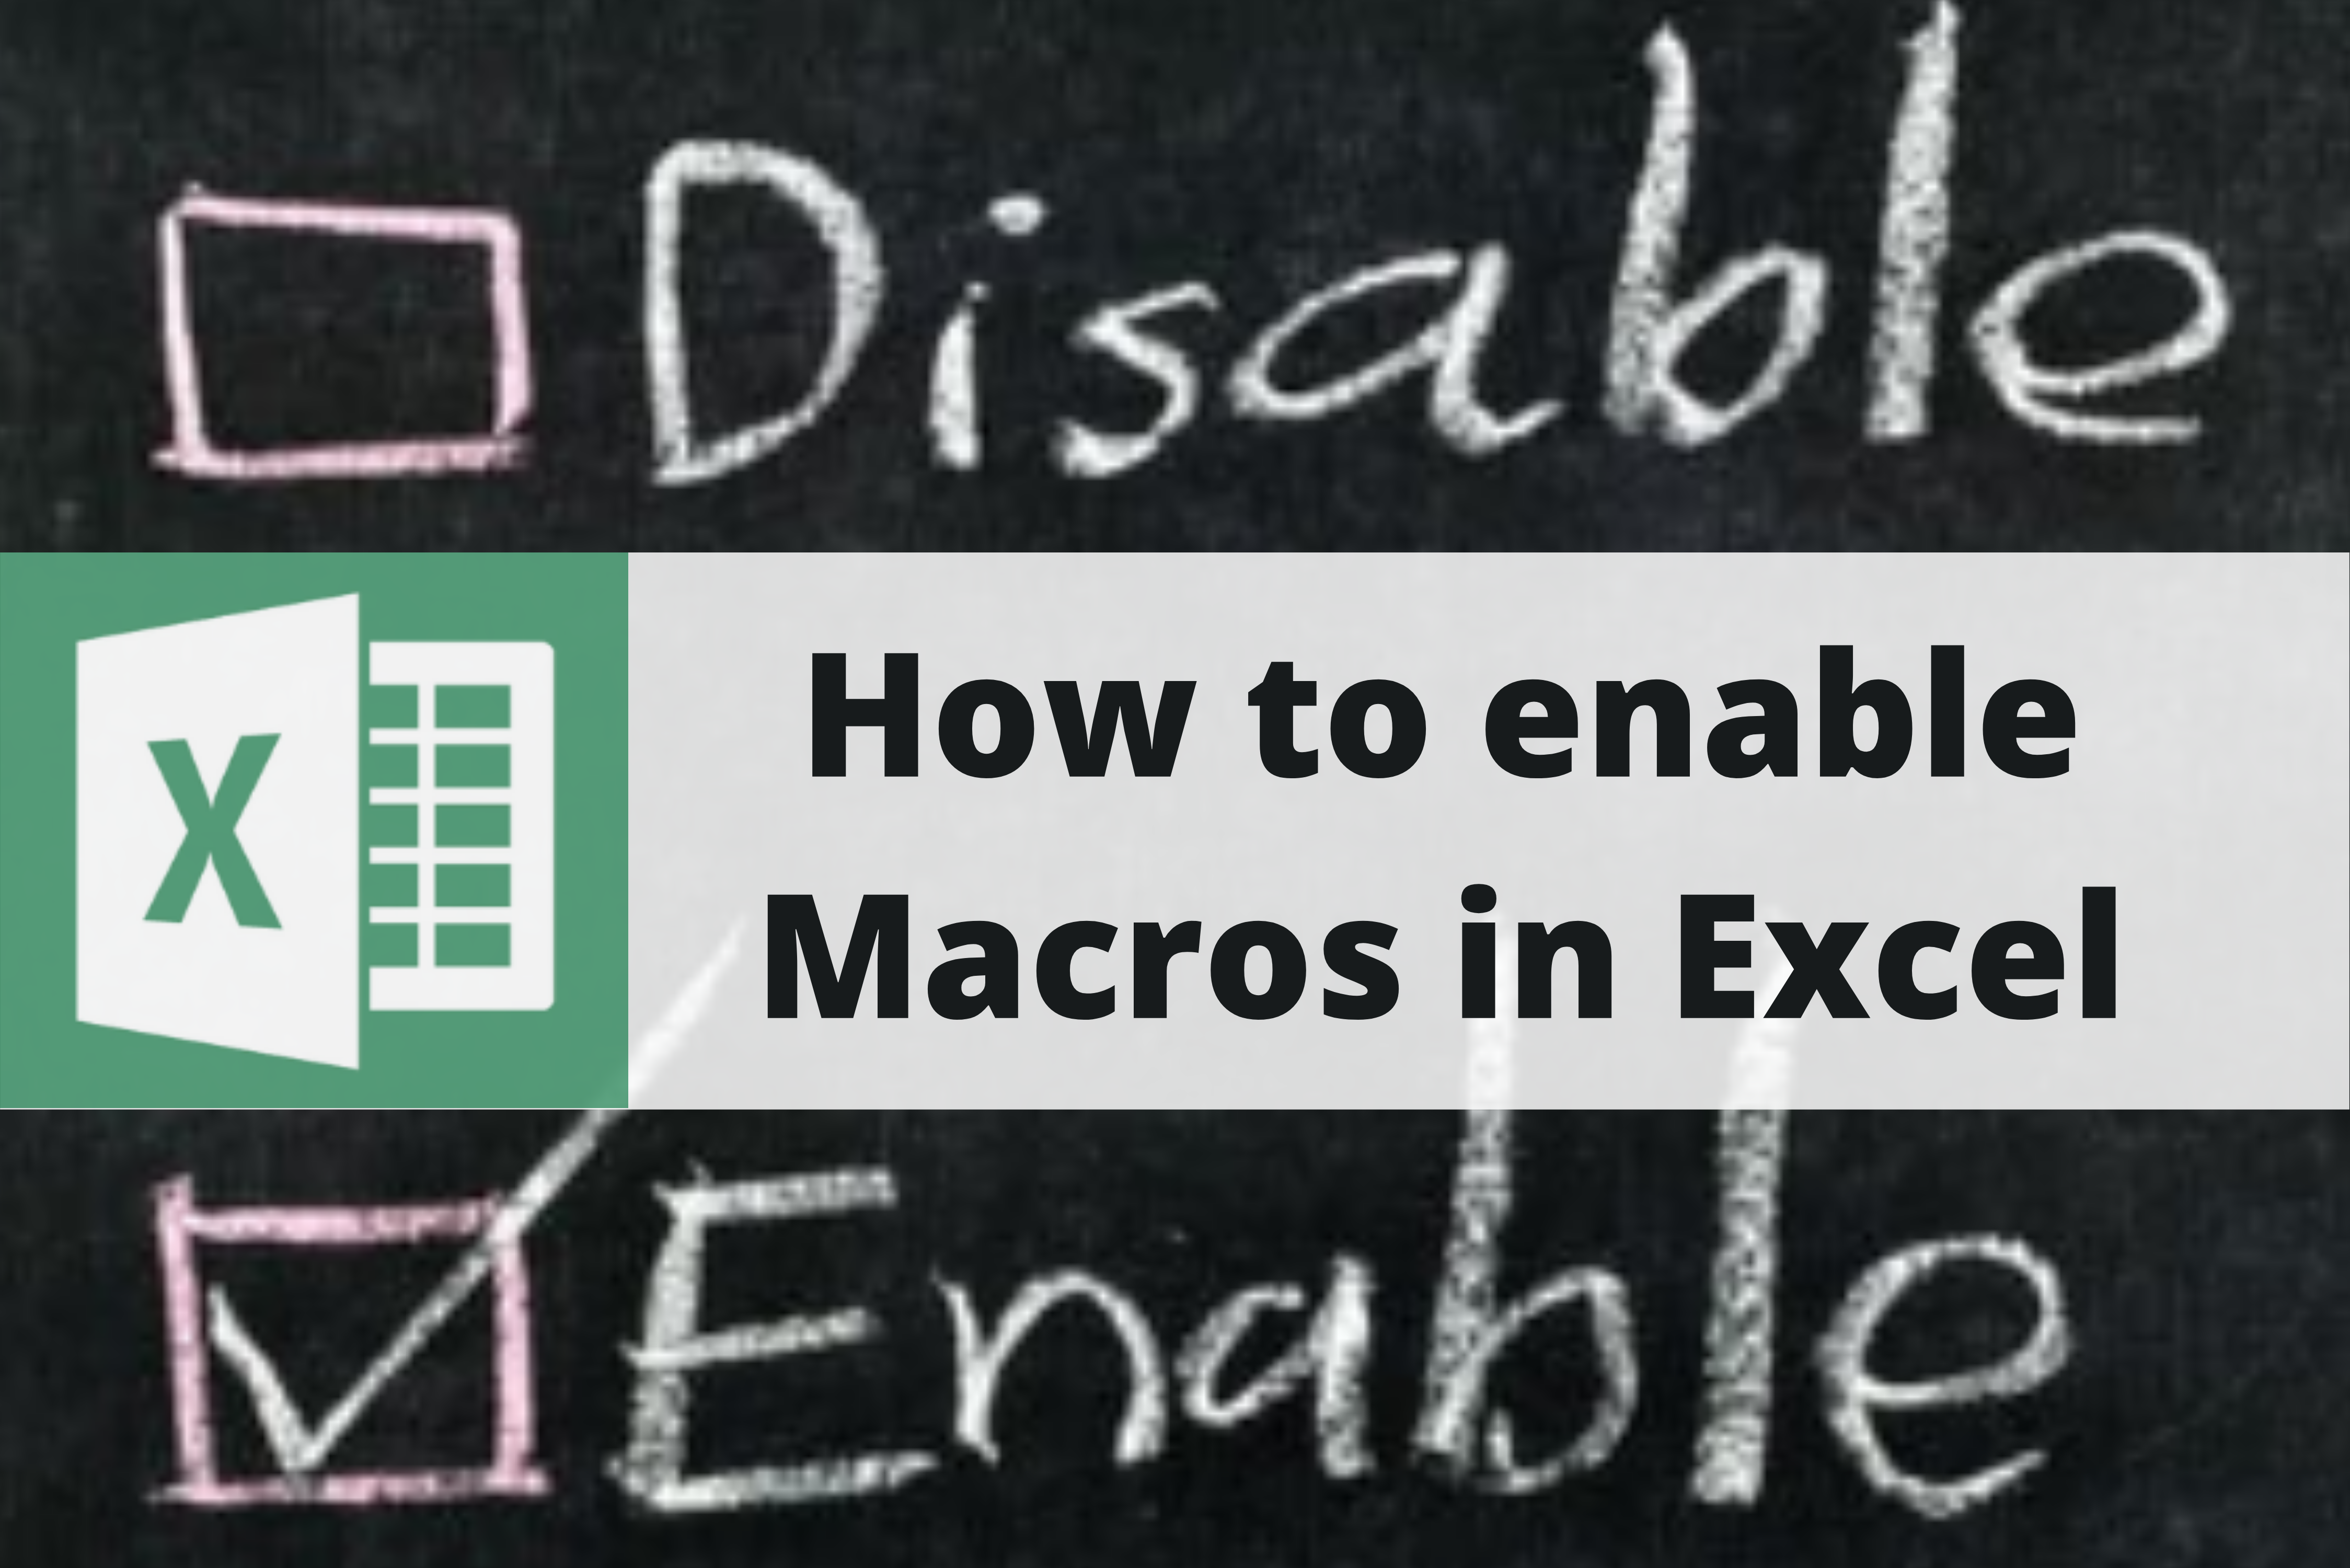 how to disable macros in excel if using mac